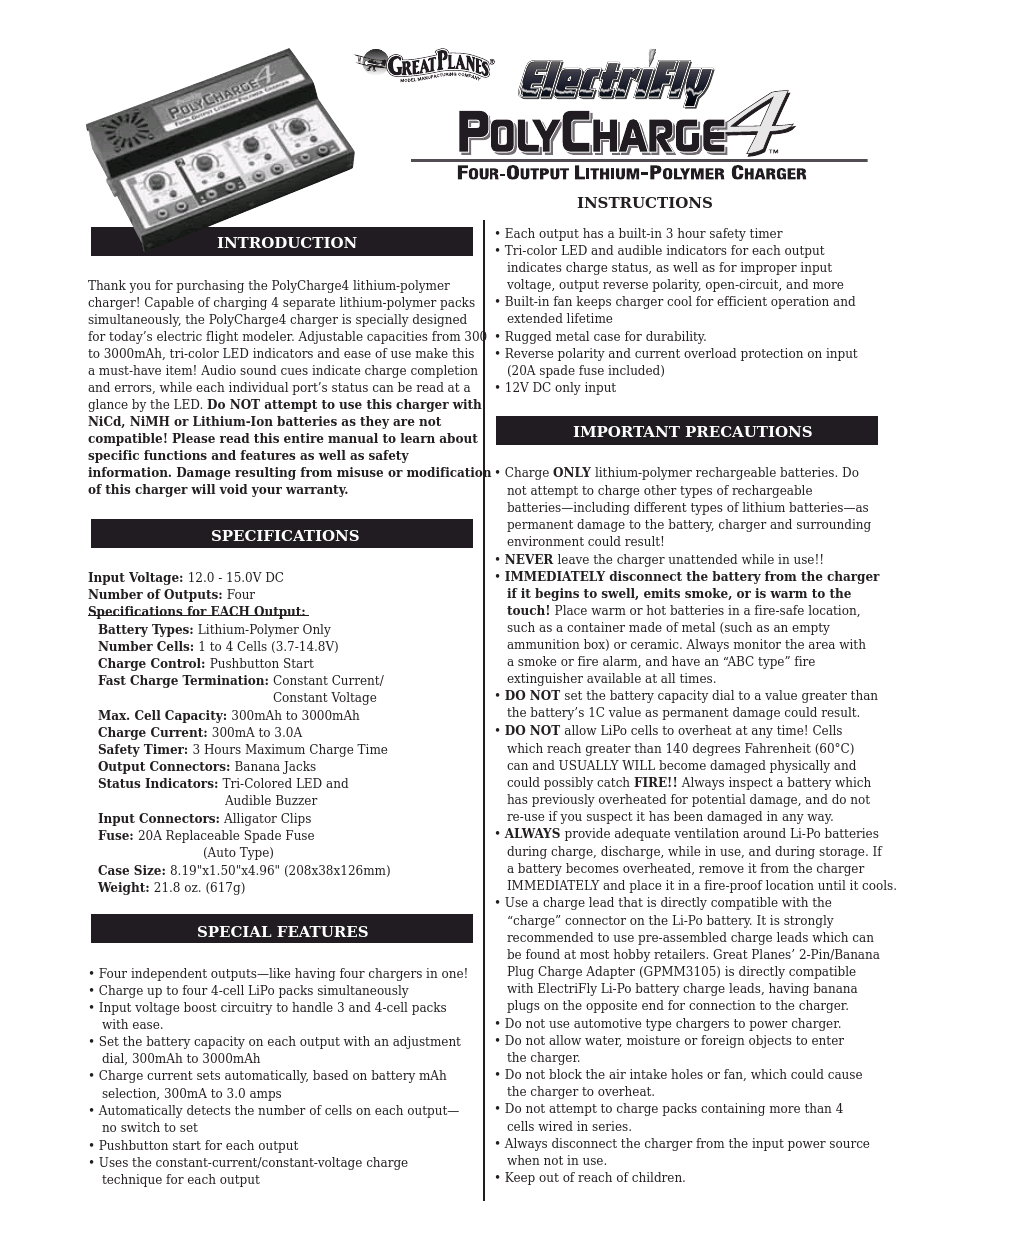 PolyCharge4 - GPMM3015